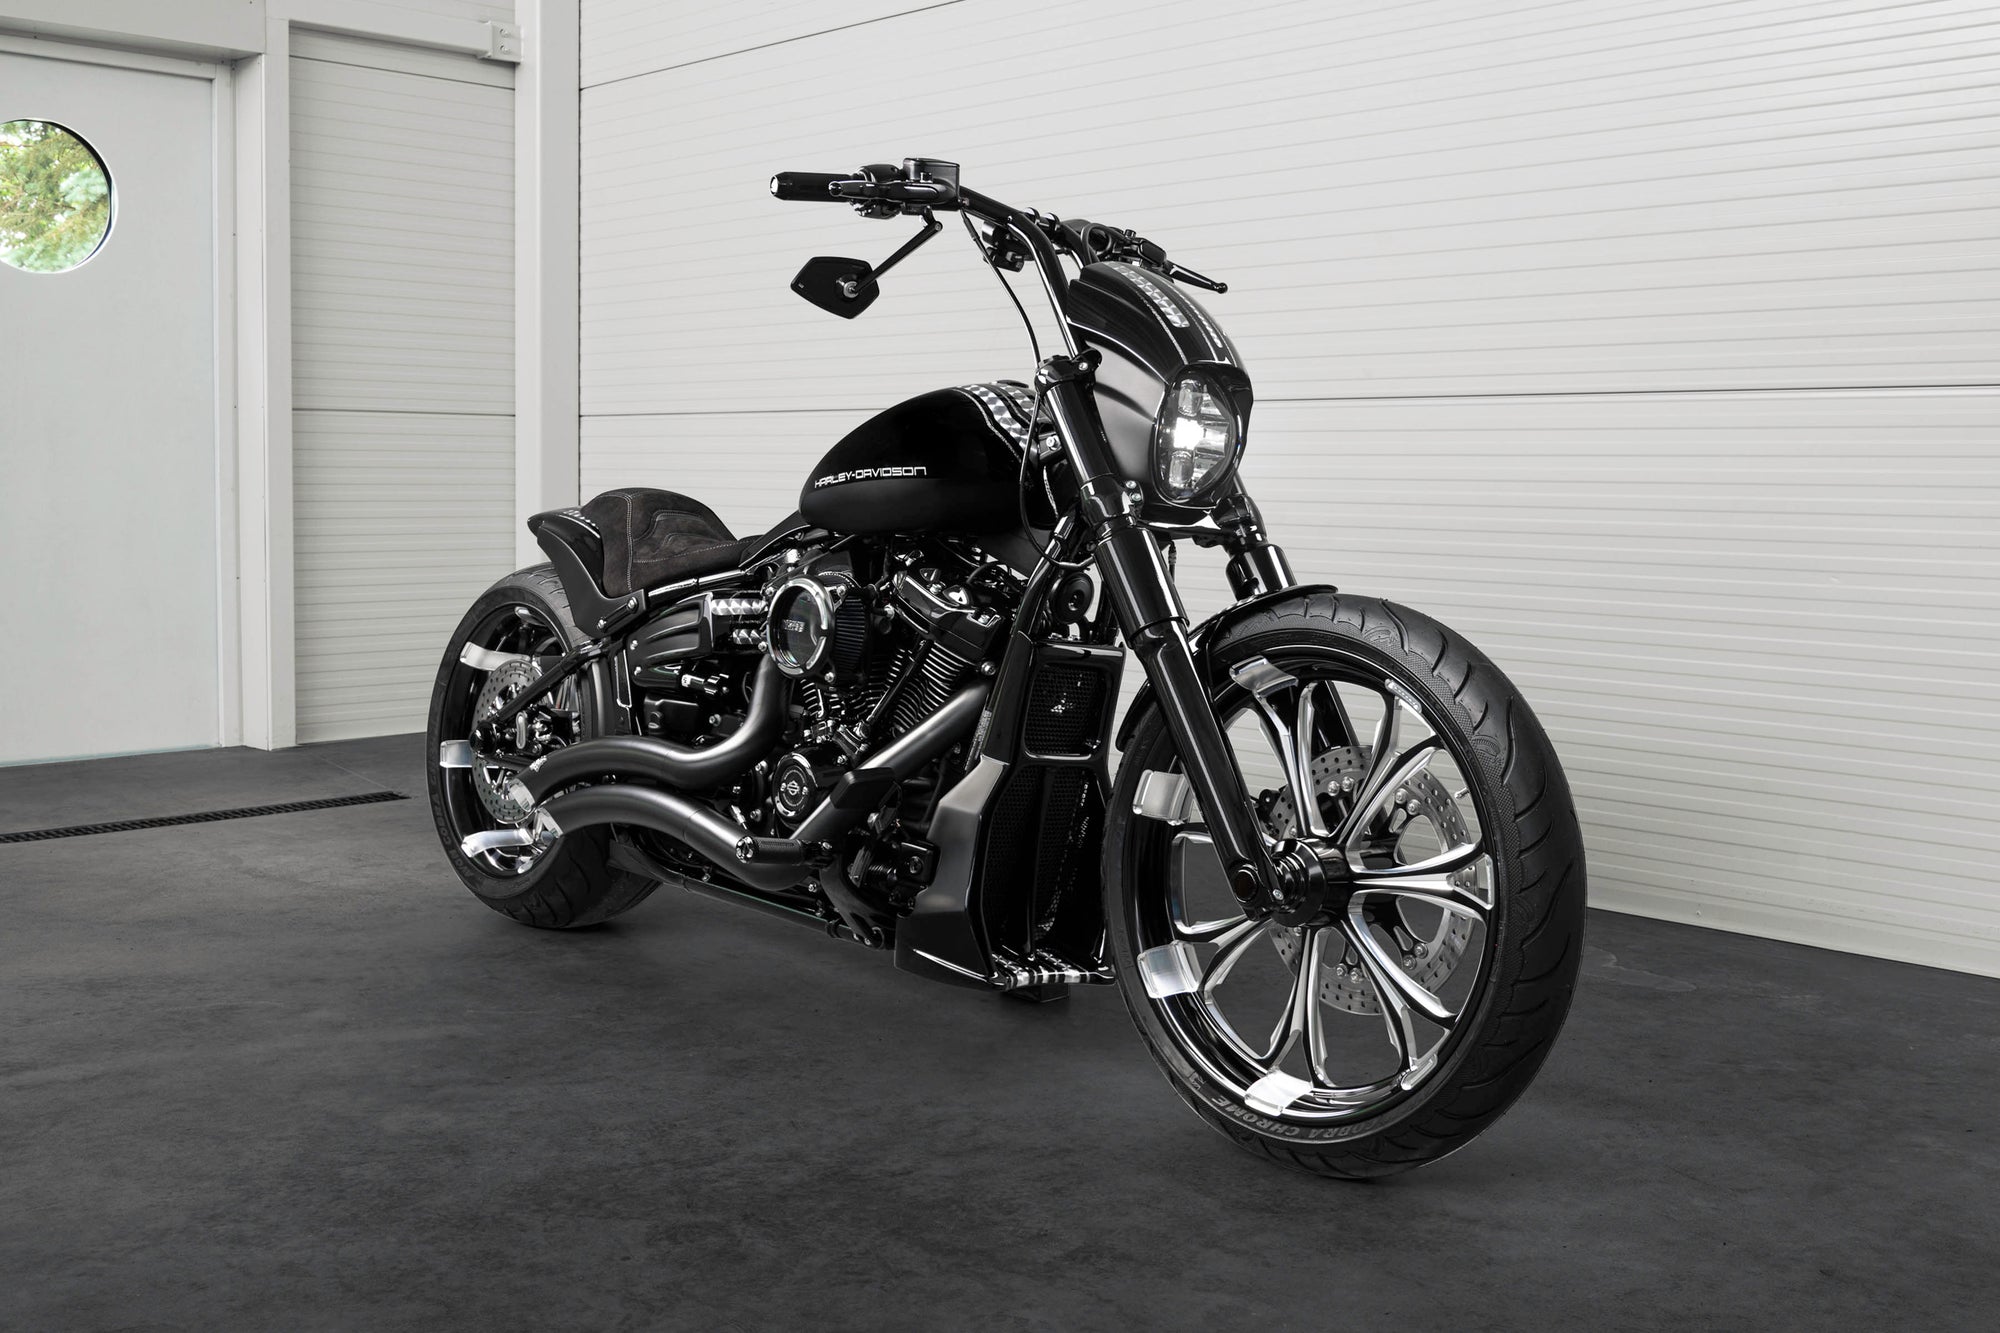 Modified Harley Davidson Breakout motorcycle with Killer Custom parts from the front in a white modern bike shop